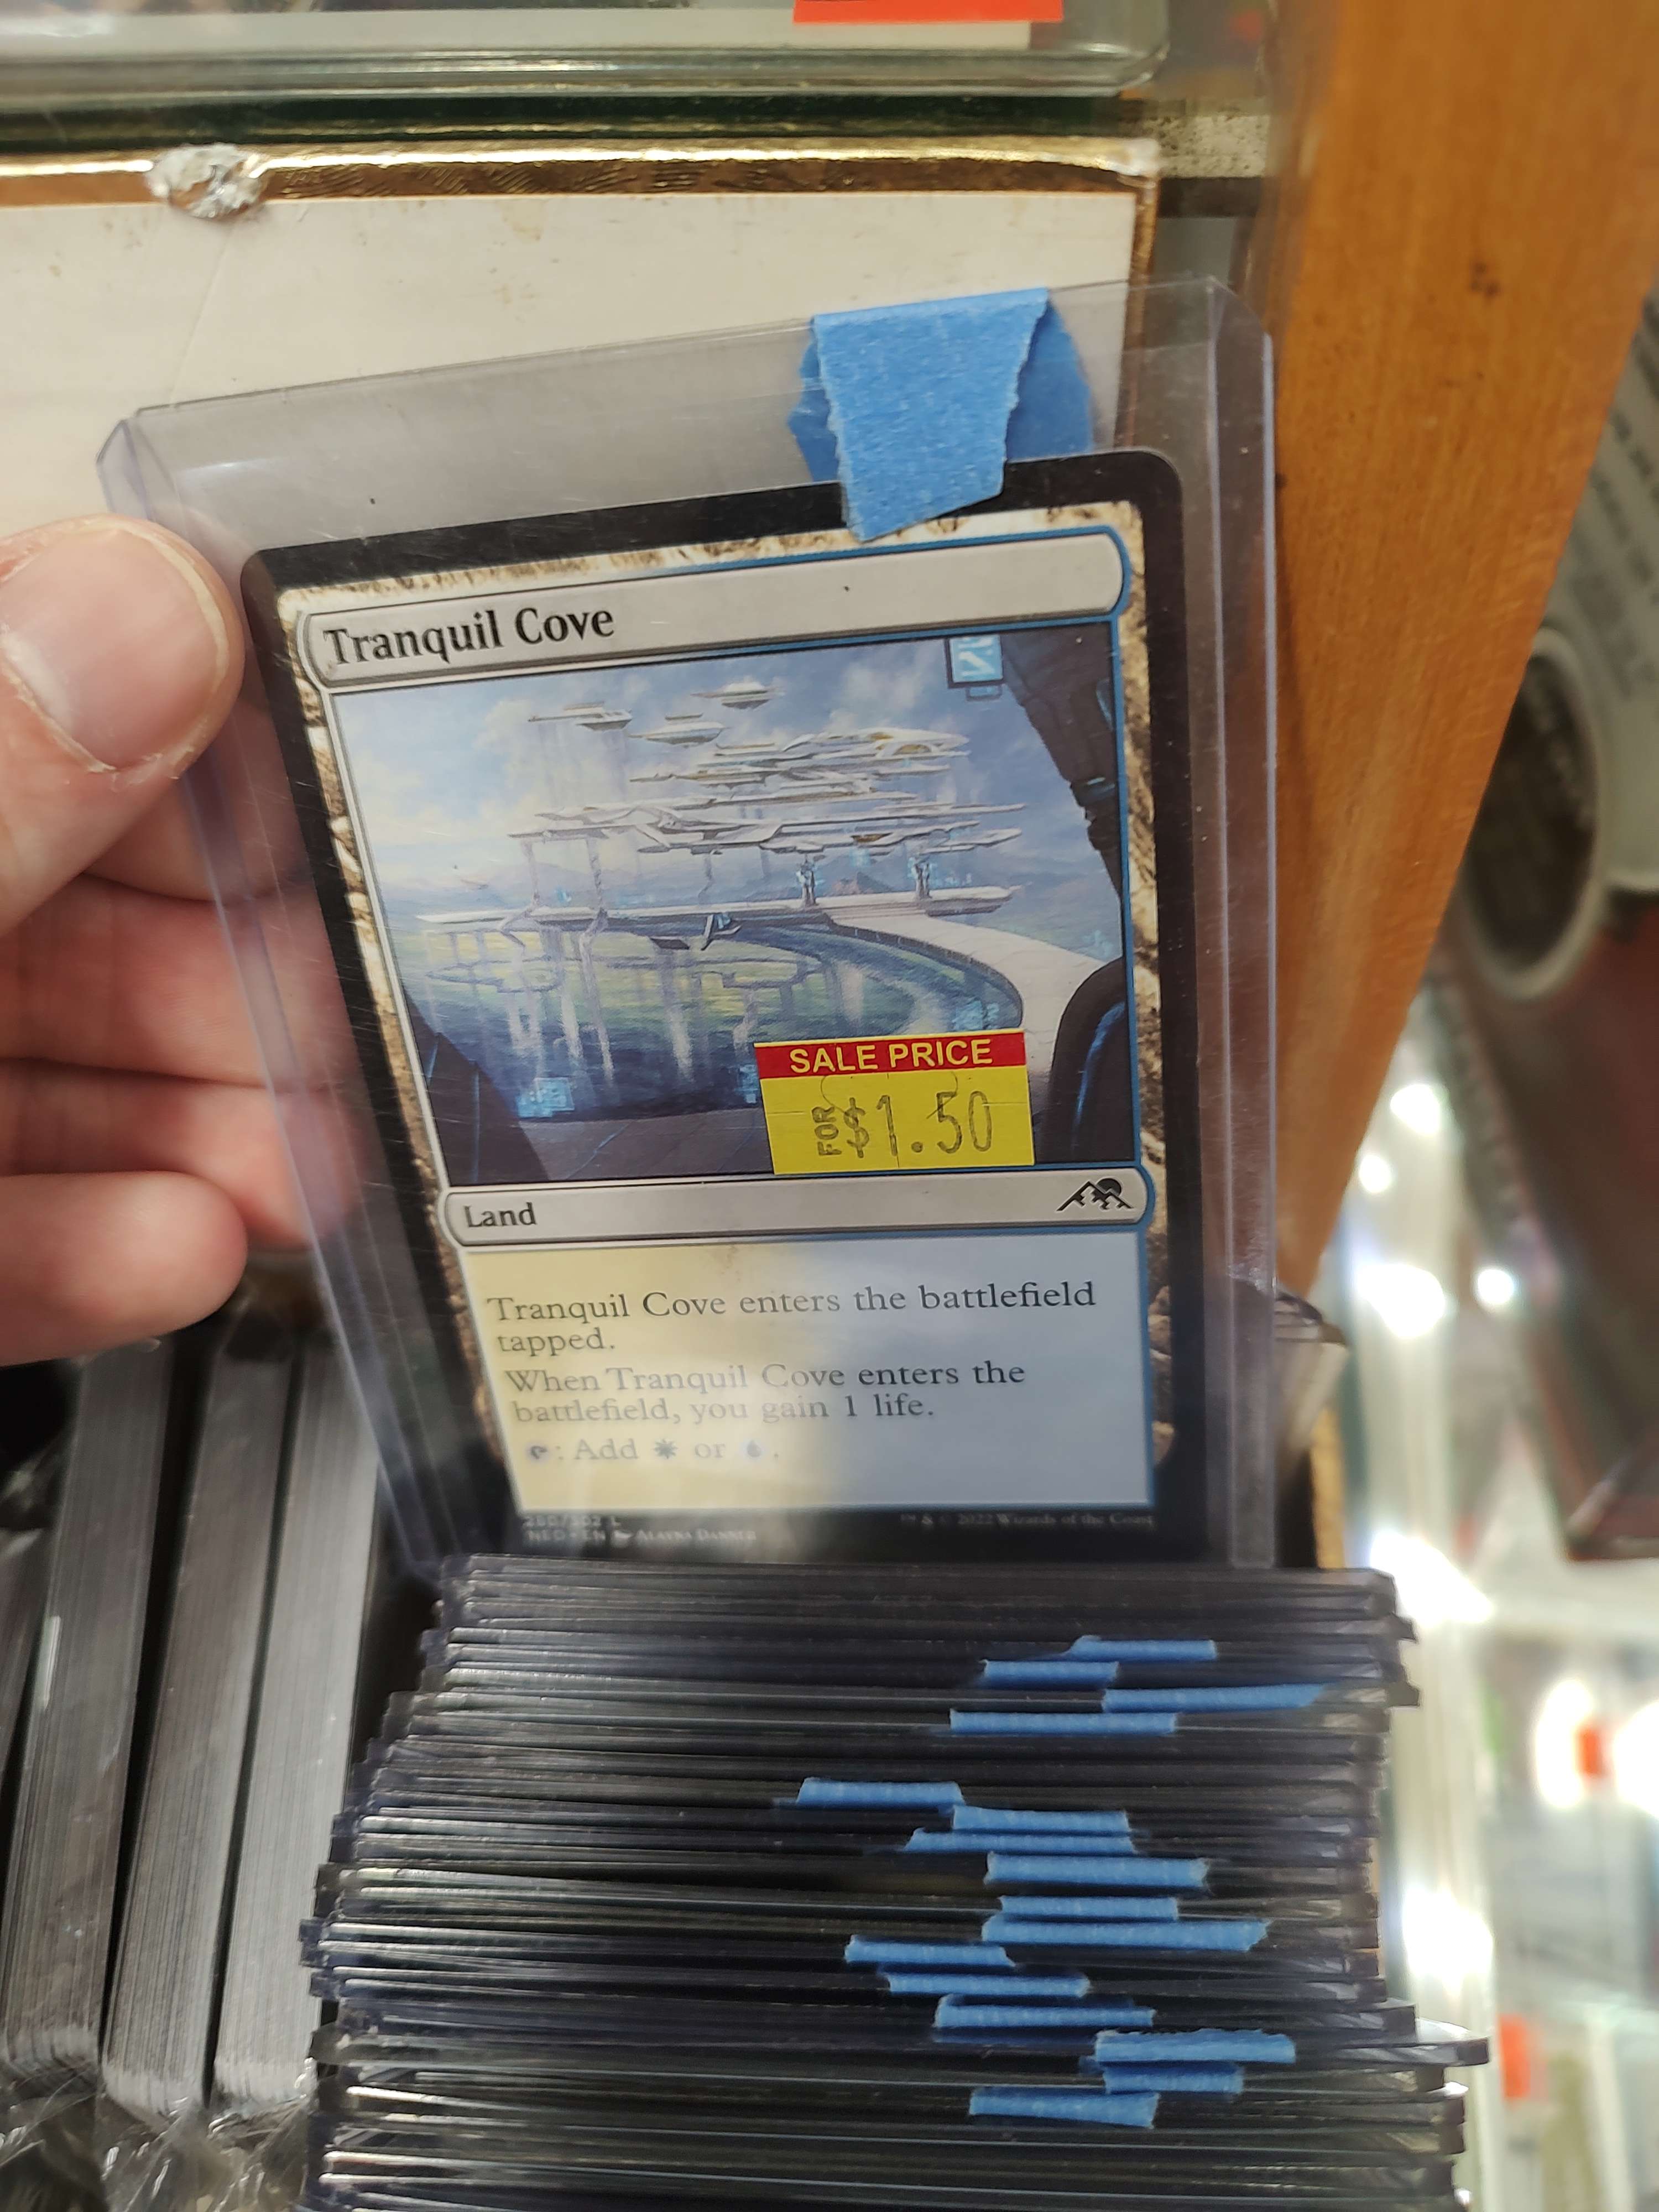 NEO tranquil cove being sold for $1.50